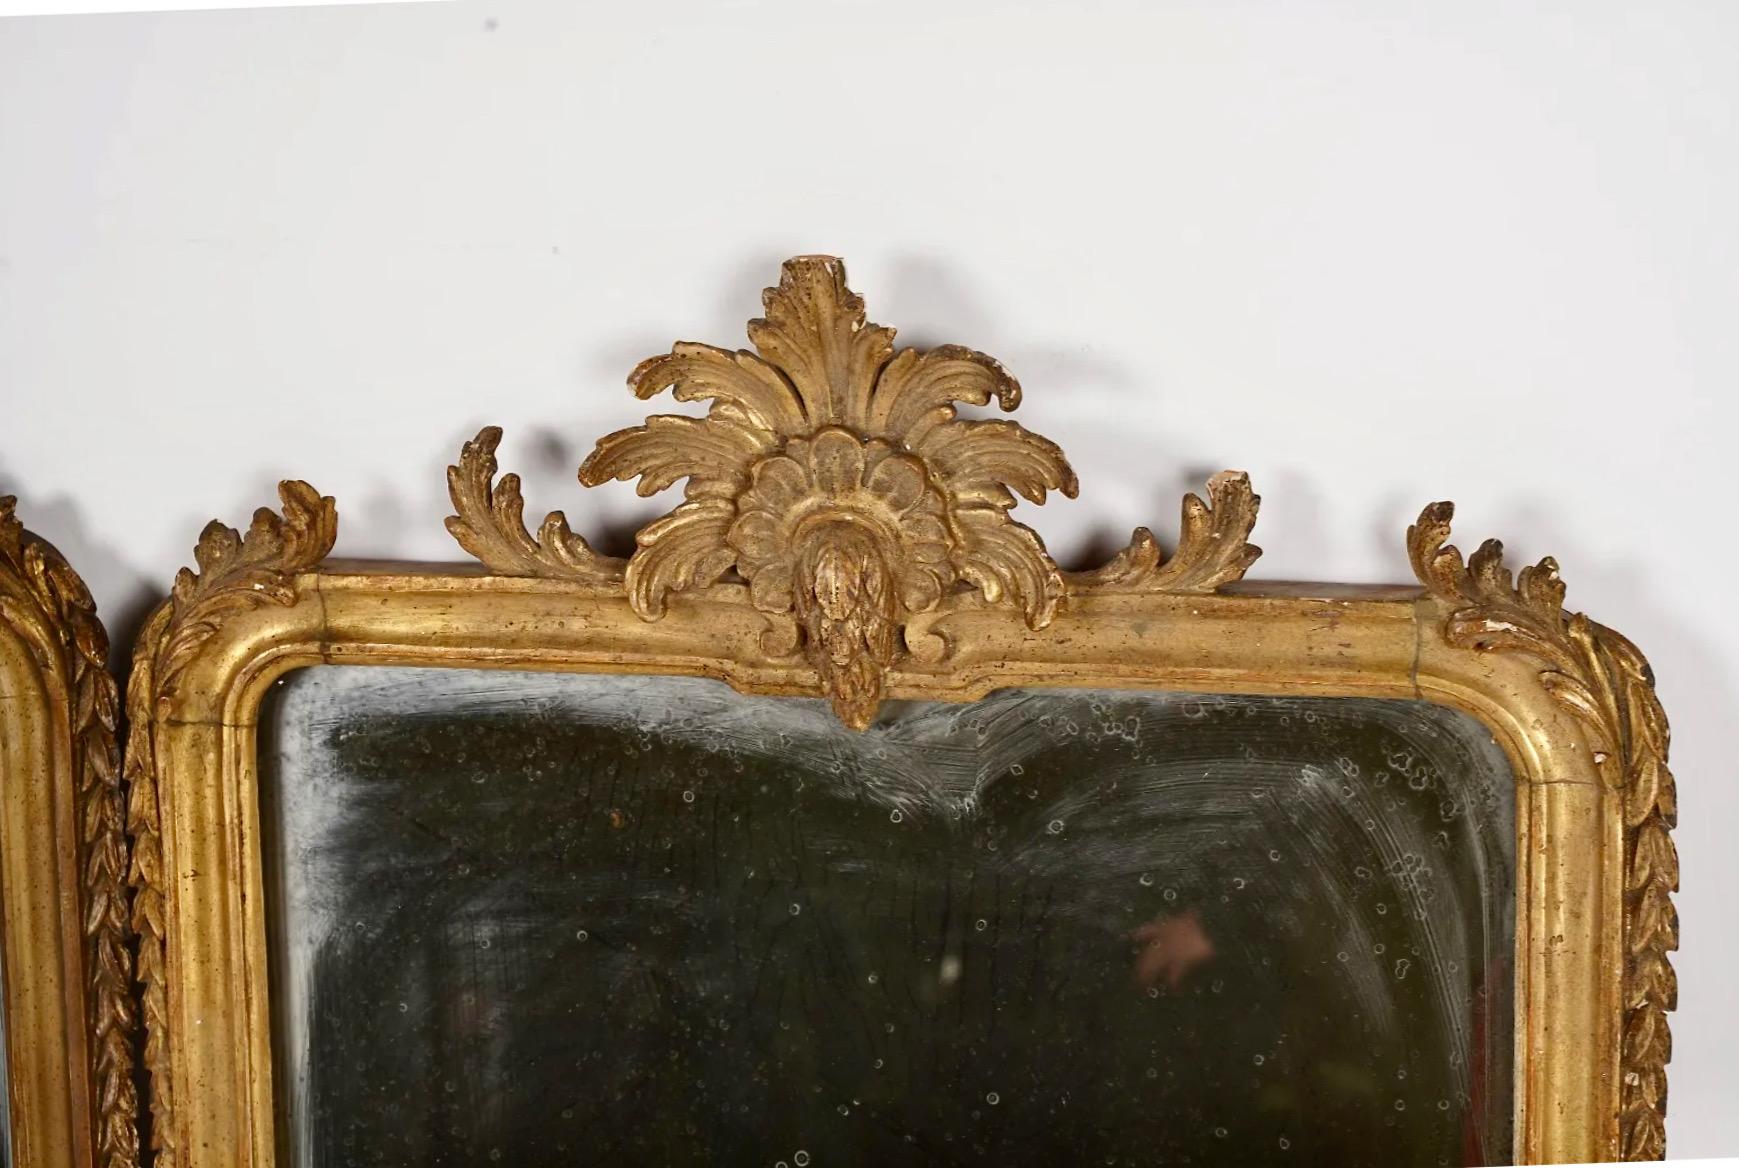 This is a very unusual pair of late 17th or early 18th century Italian Baroque Girandoles. The girandoles feature a finely executed carved gilt wood frame that is surmounted by a finely carved and gilt acanthus leaf crest. The acanthus leaf candle